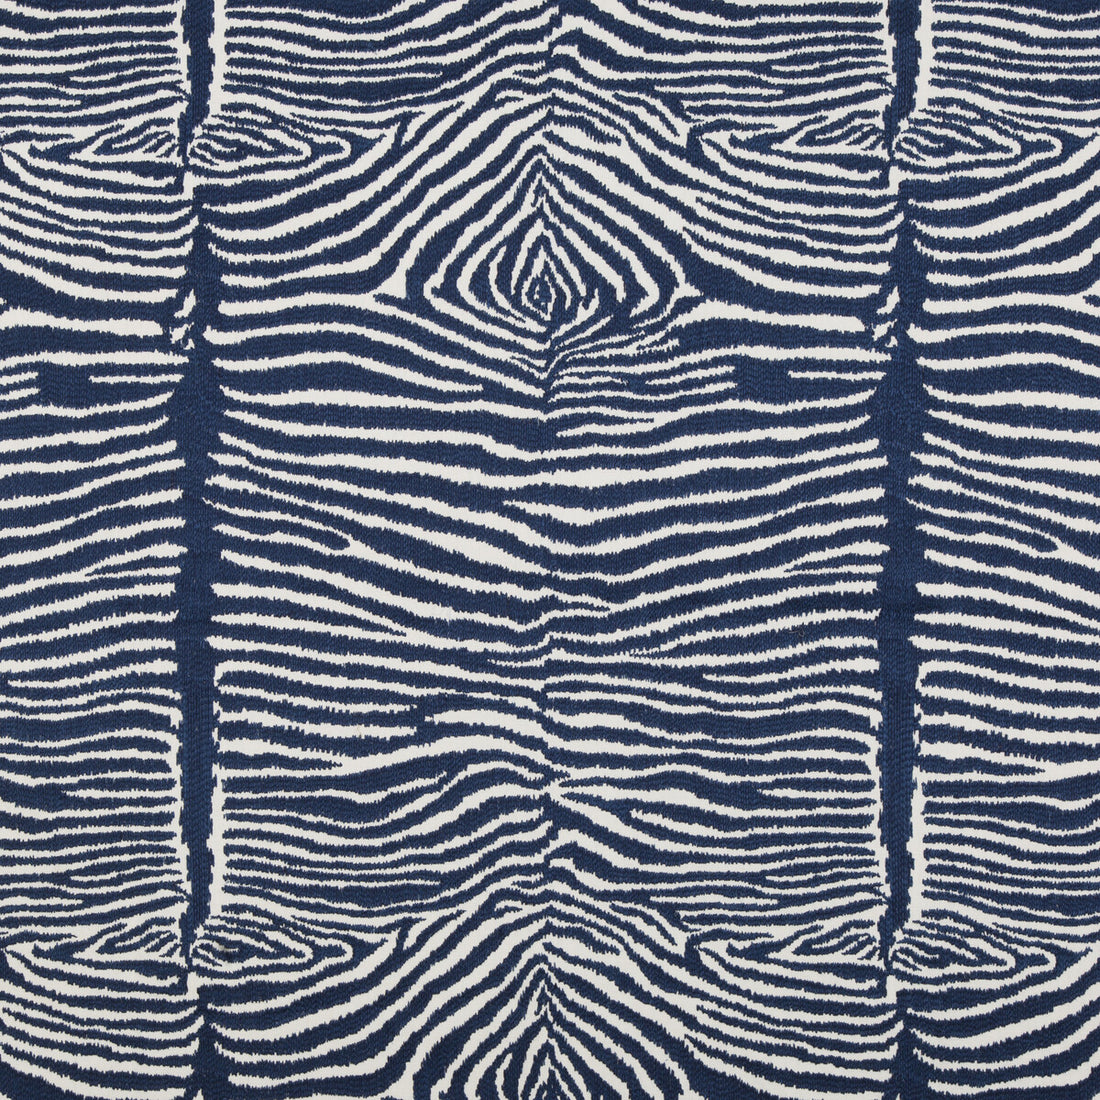 Le Zebre Emb fabric in navy color - pattern 8015172.50.0 - by Brunschwig &amp; Fils in the Cape Comorin collection